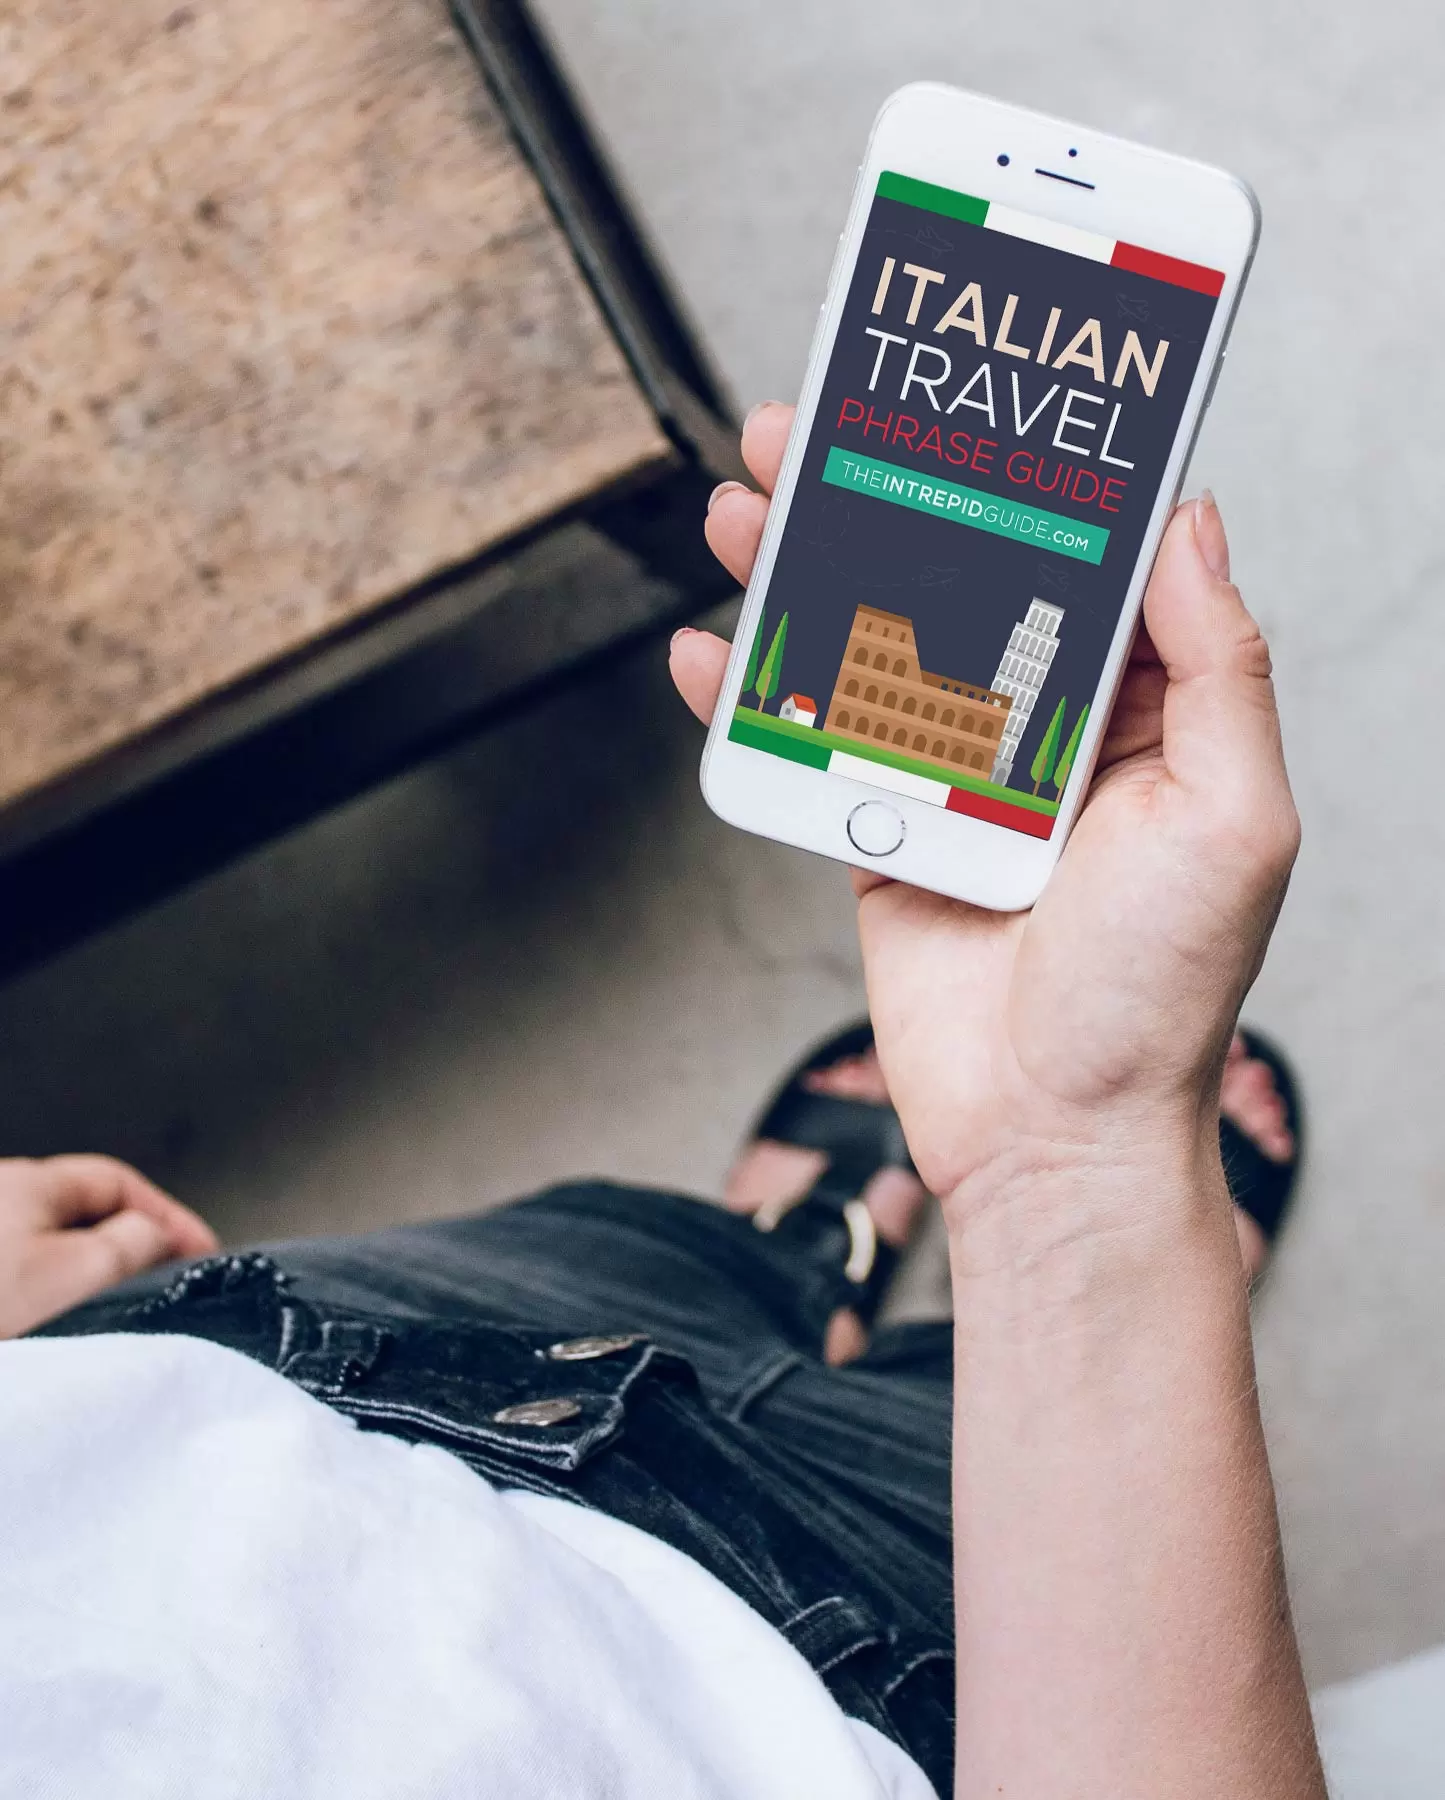 Italian Phrases for Travel Course - Access the course on your phone